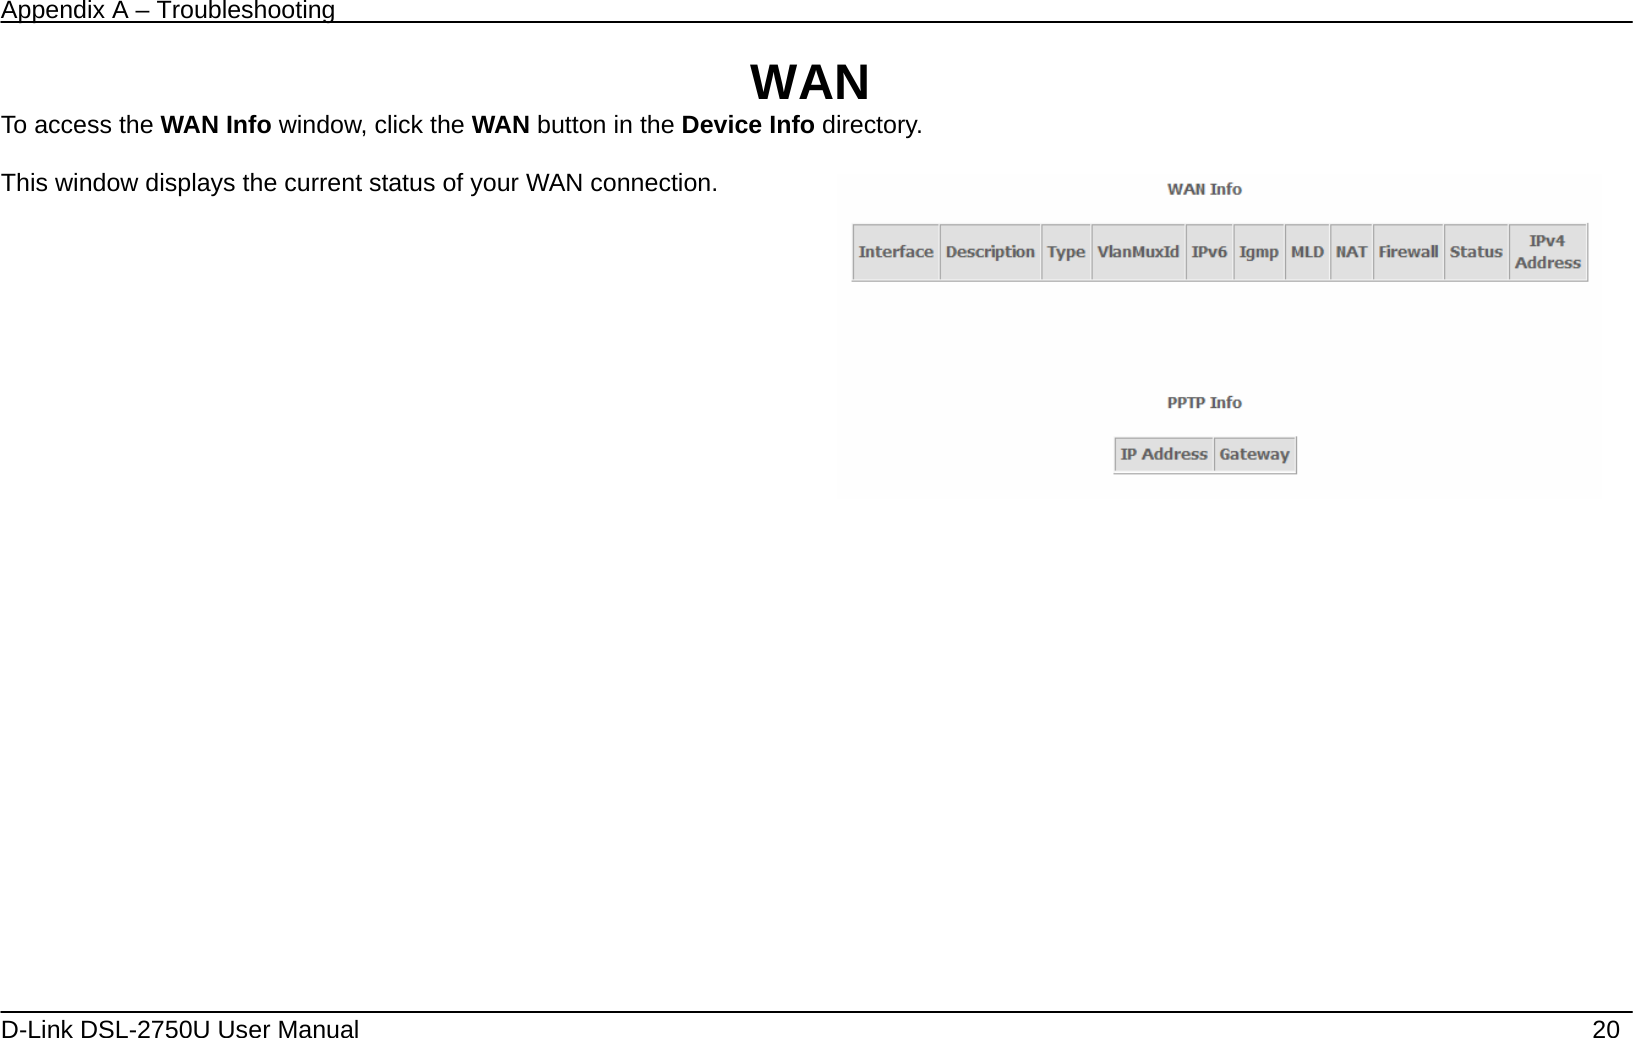 Appendix A – Troubleshooting   D-Link DSL-2750U User Manual    20 WAN To access the WAN Info window, click the WAN button in the Device Info directory.  This window displays the current status of your WAN connection.  